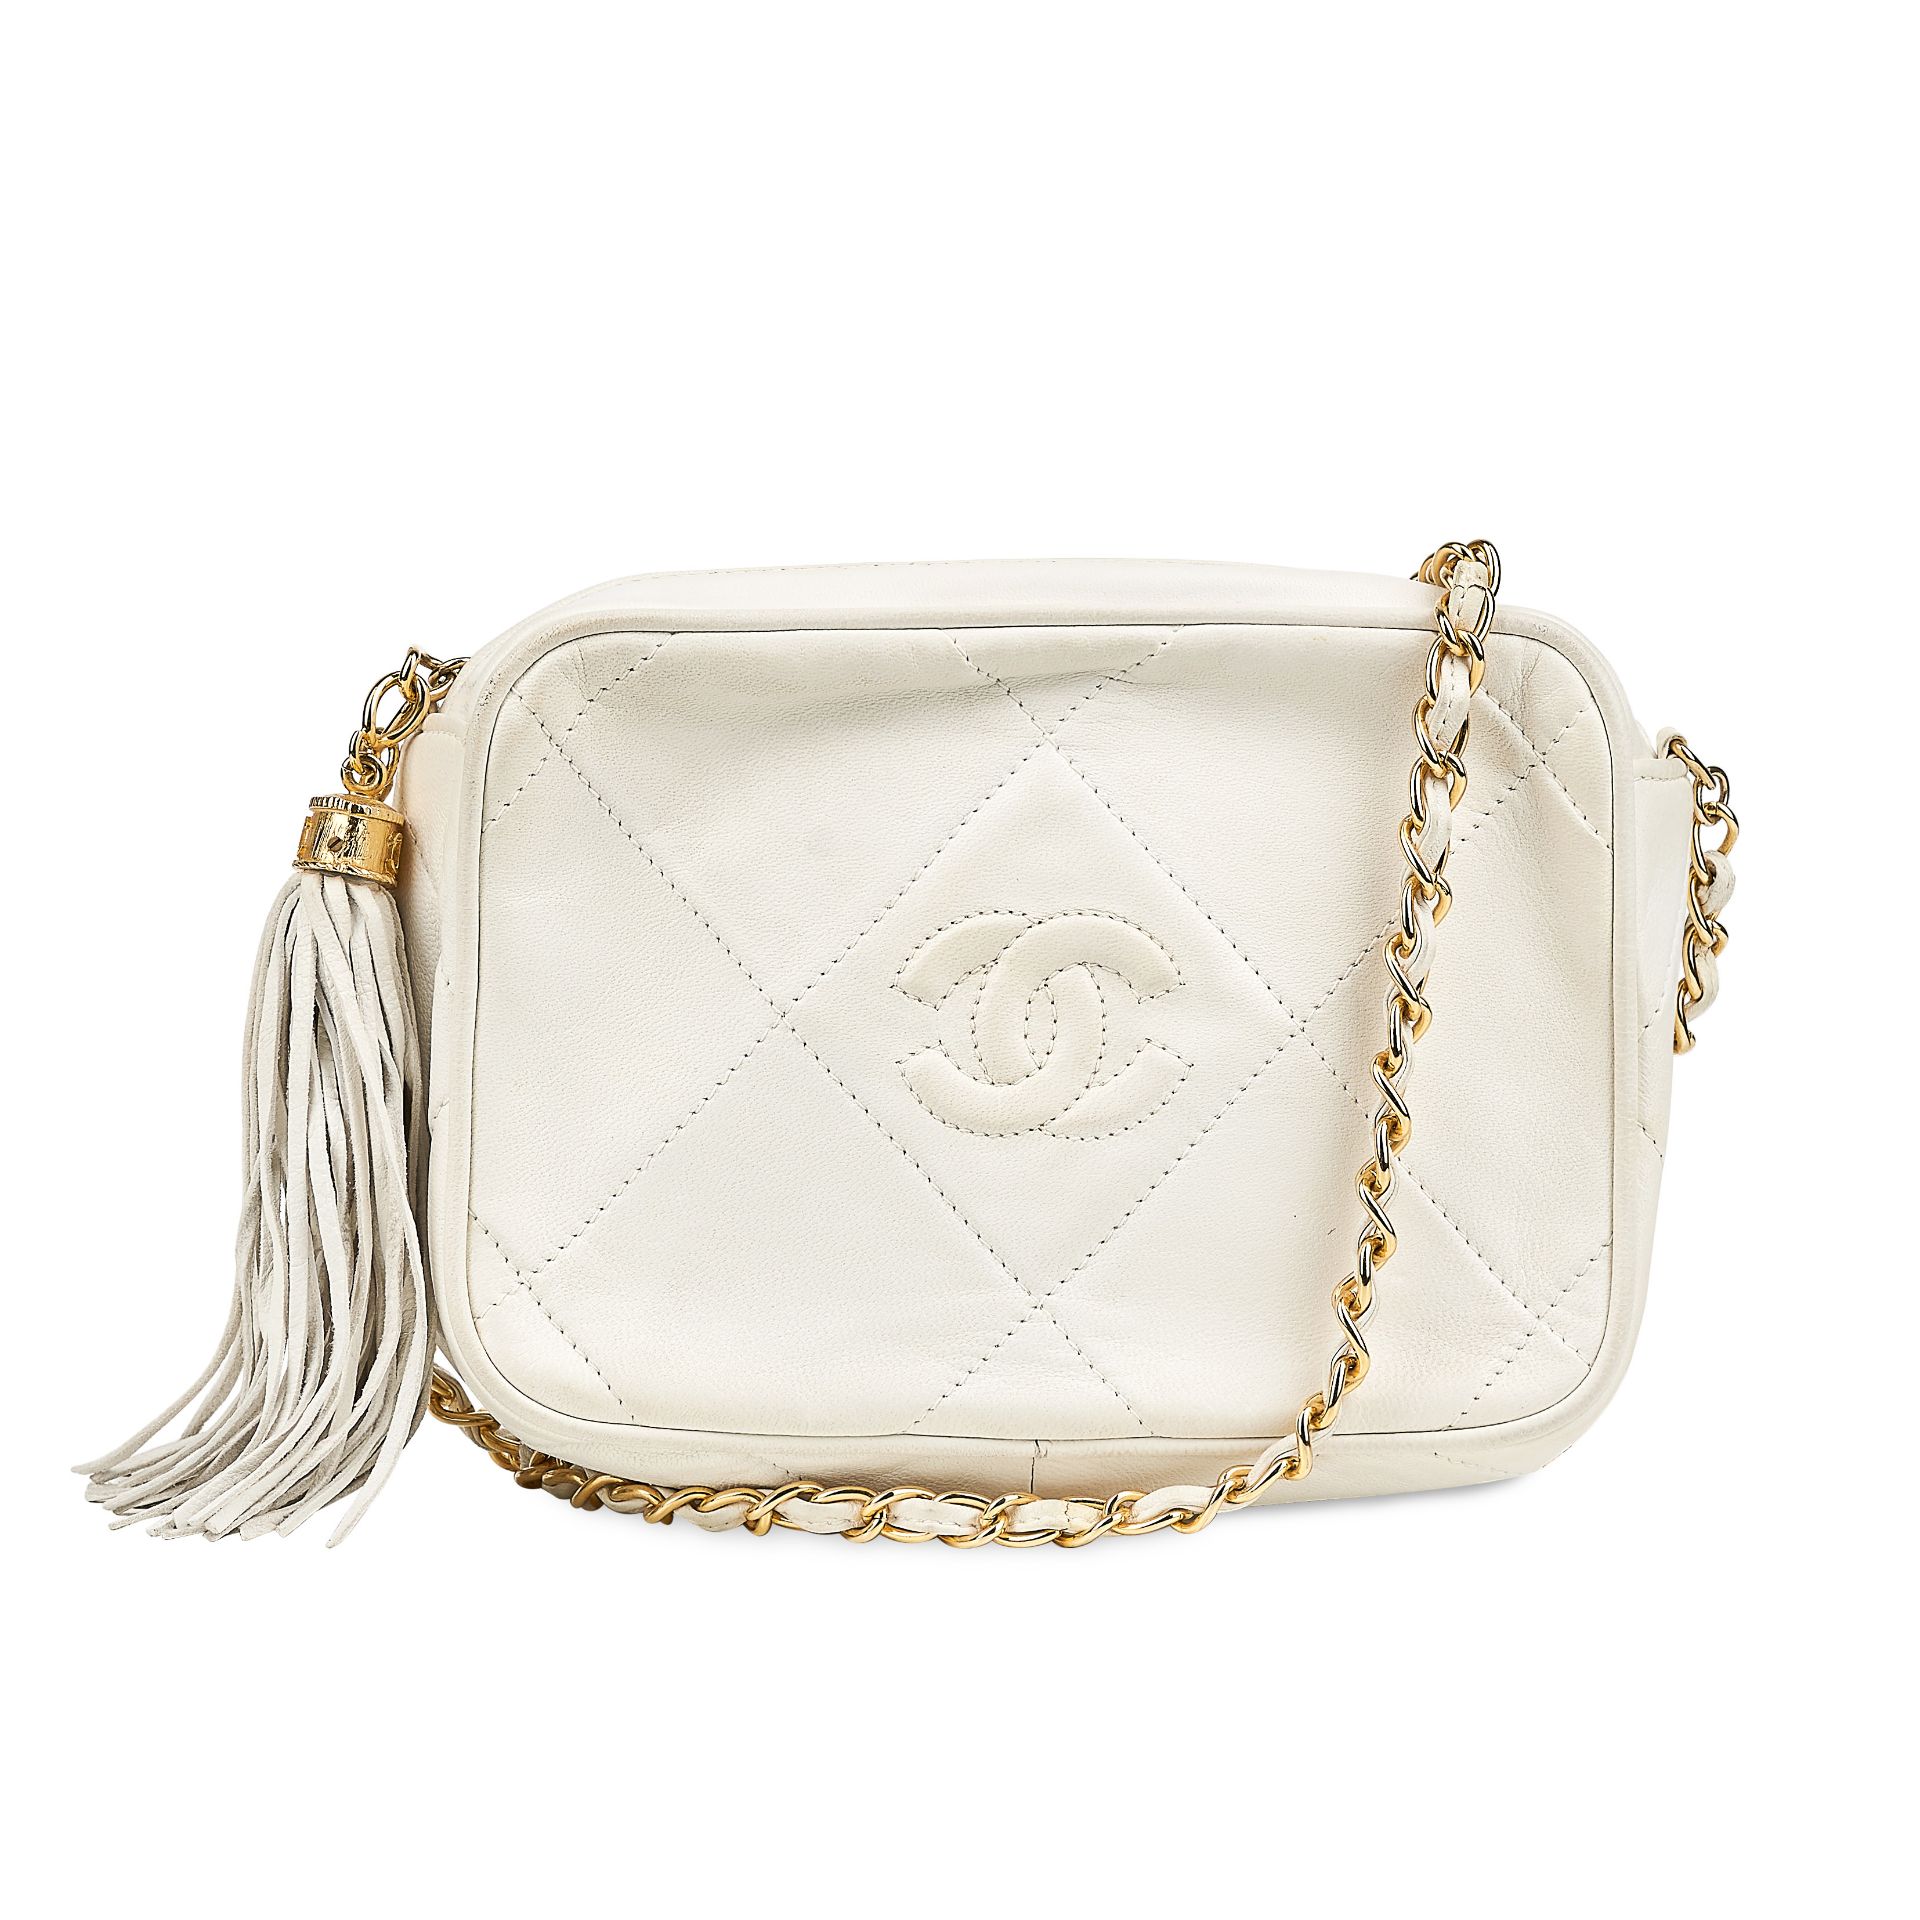 CHANEL, A WHITE VINTAGE CAMERA BAG, Condition grade B. Produced between 1986-1988